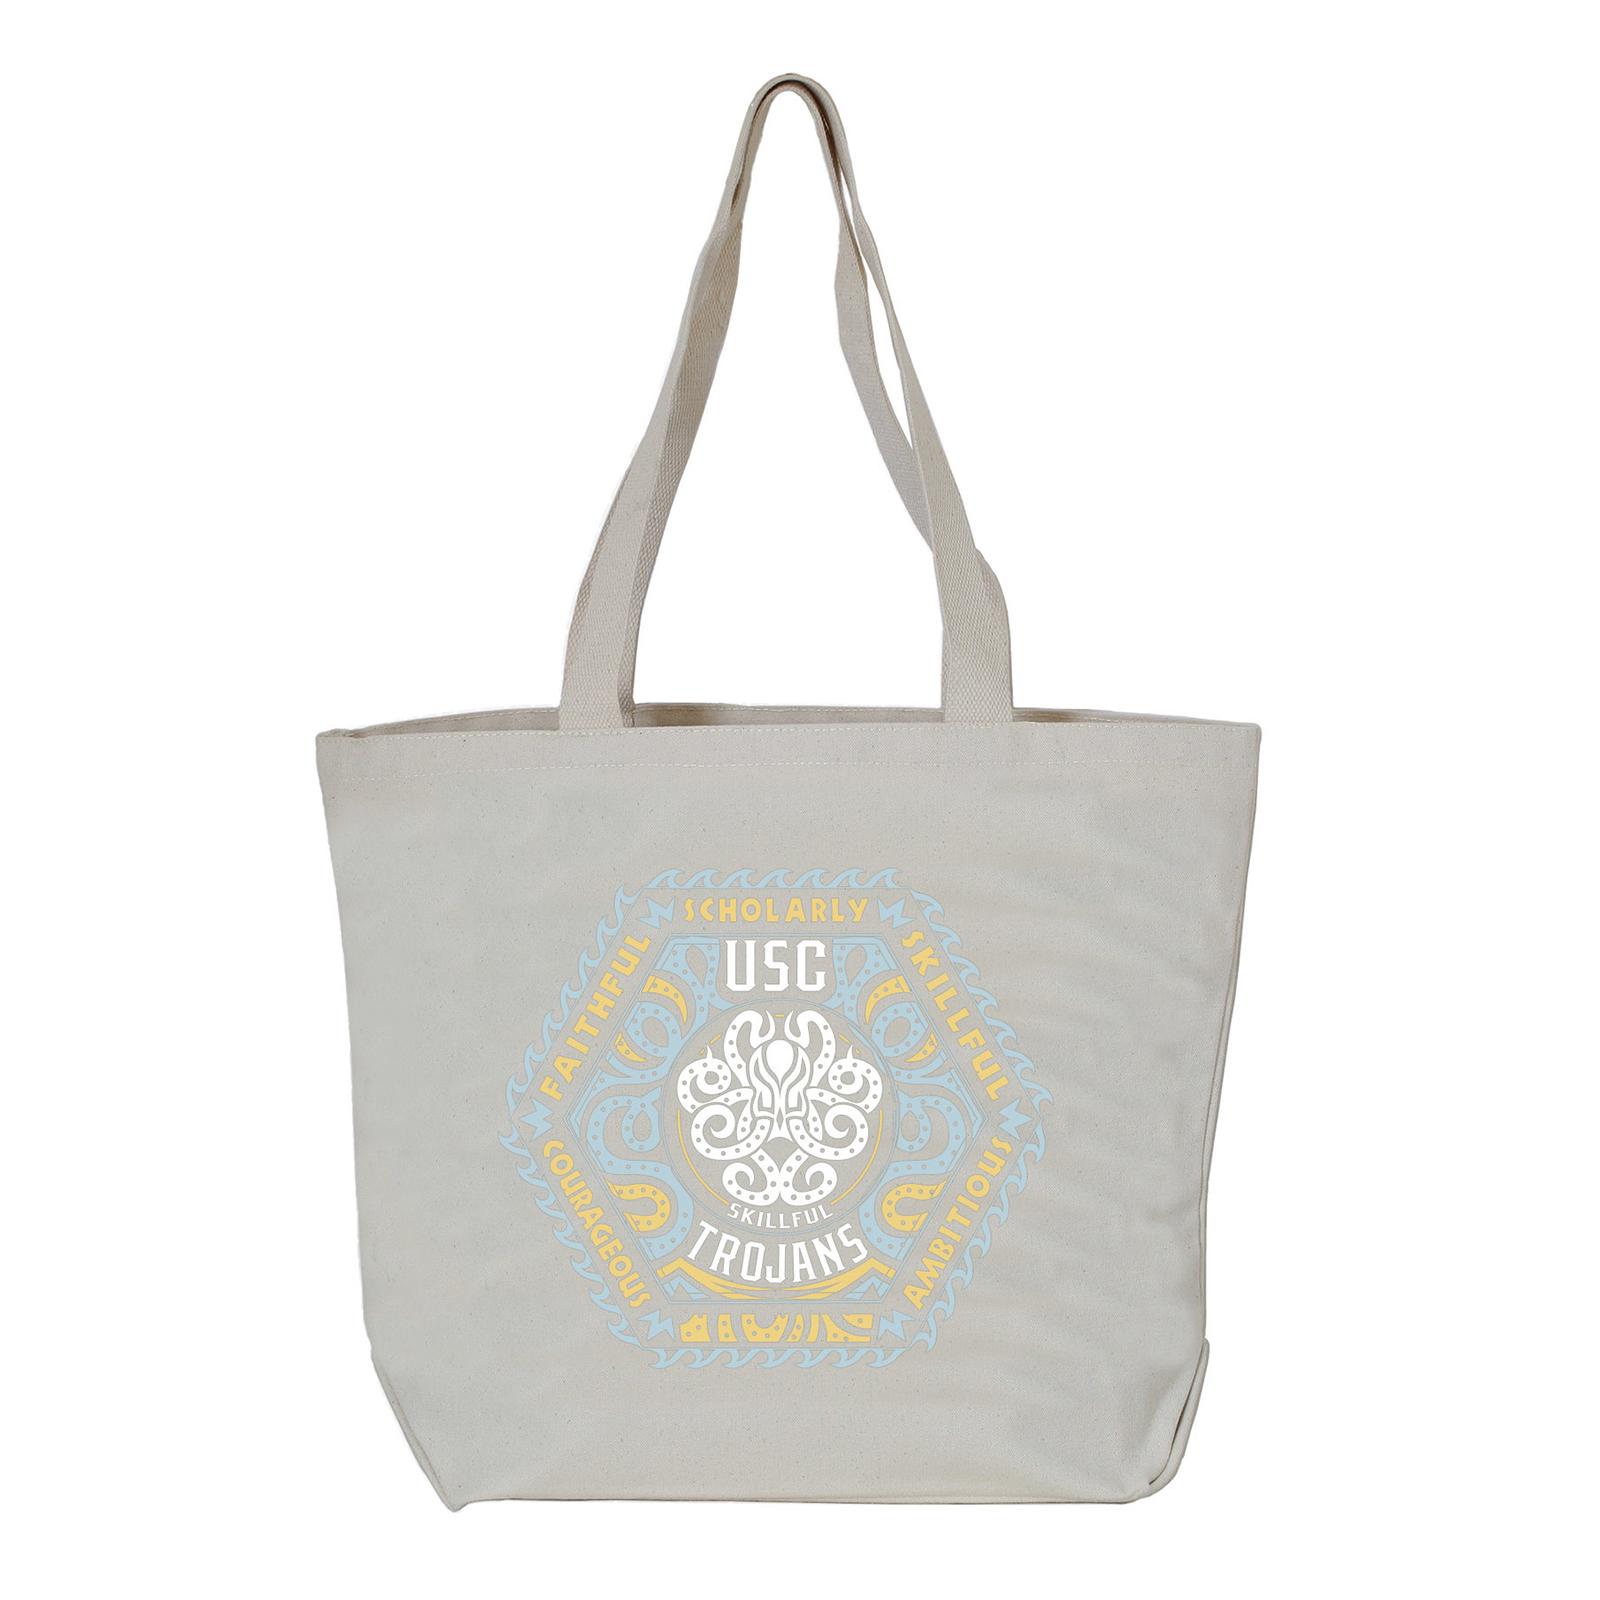 USC Trojans Skillful Tote by Spirit image01